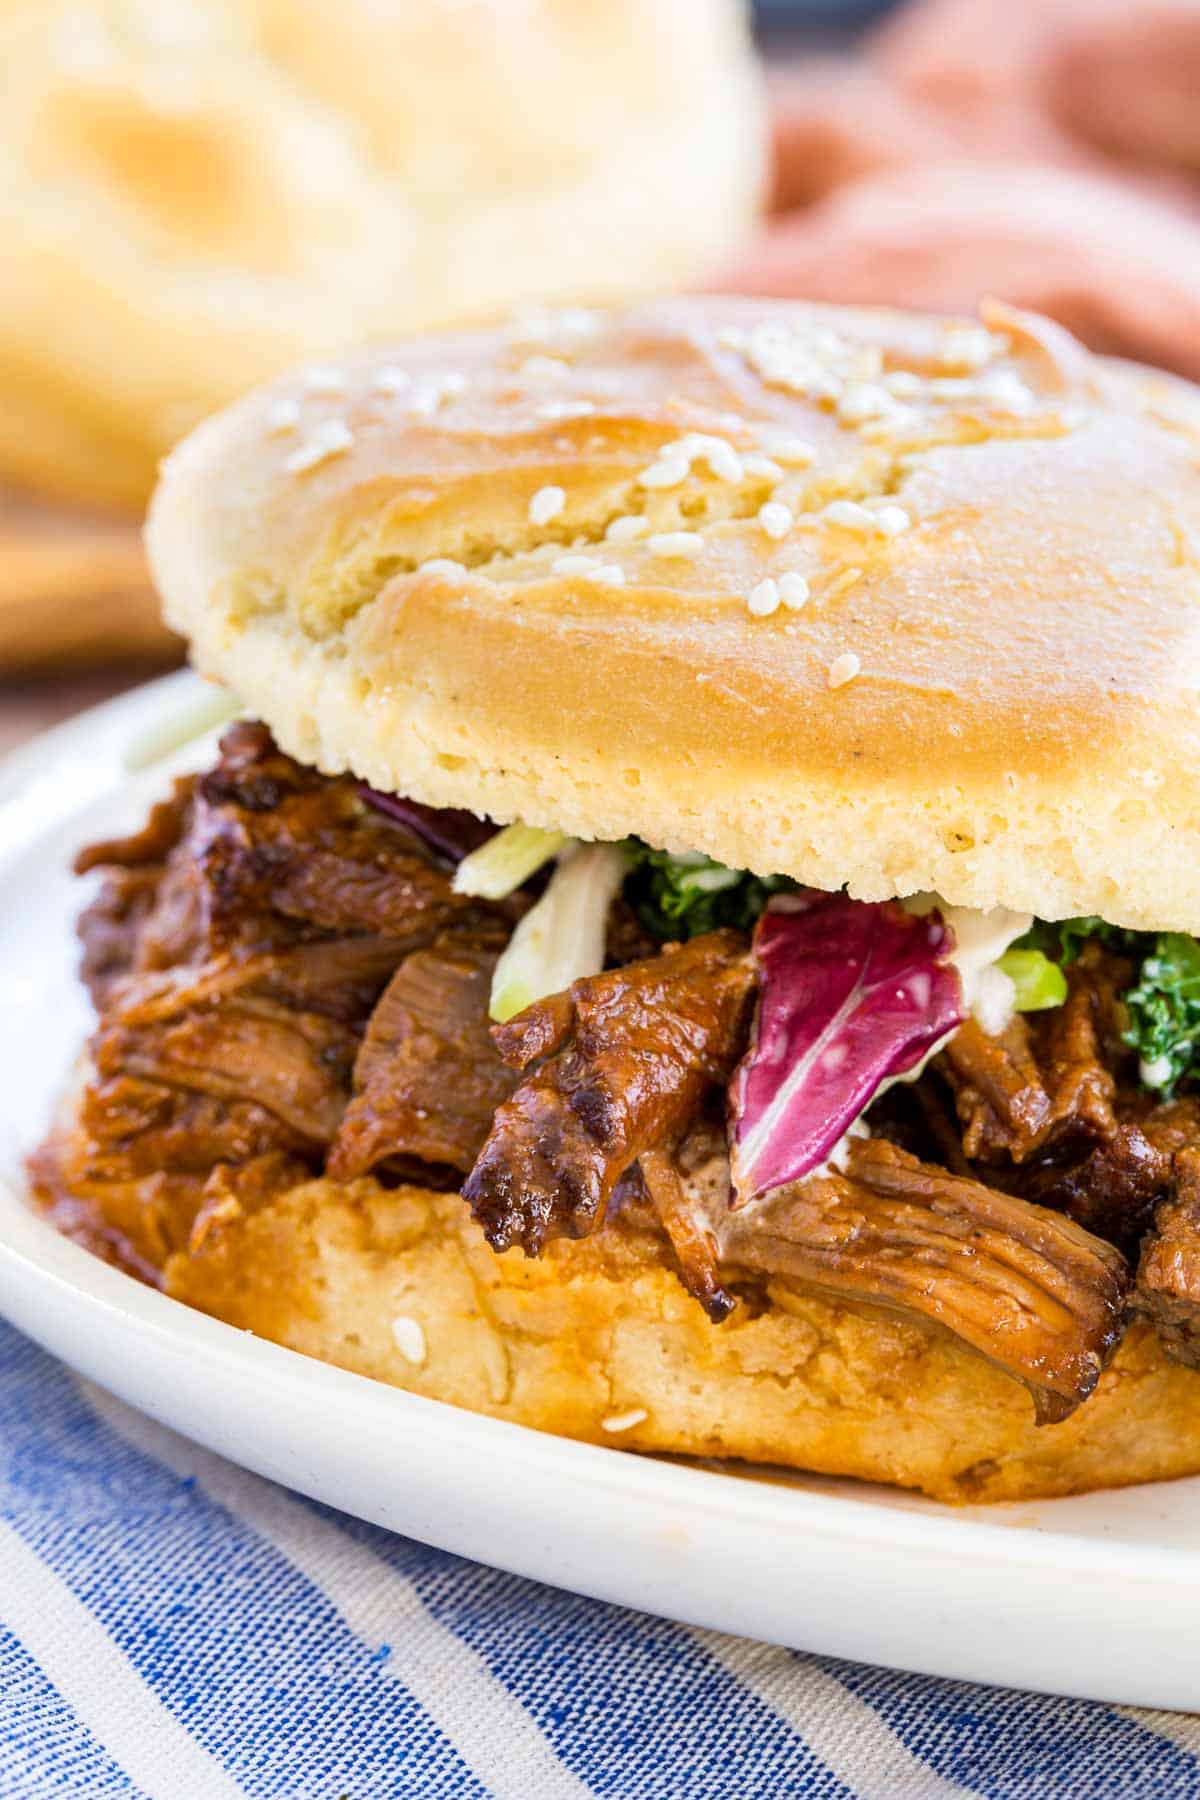 A Crockpot barbecue beef sandwich served on a plate.